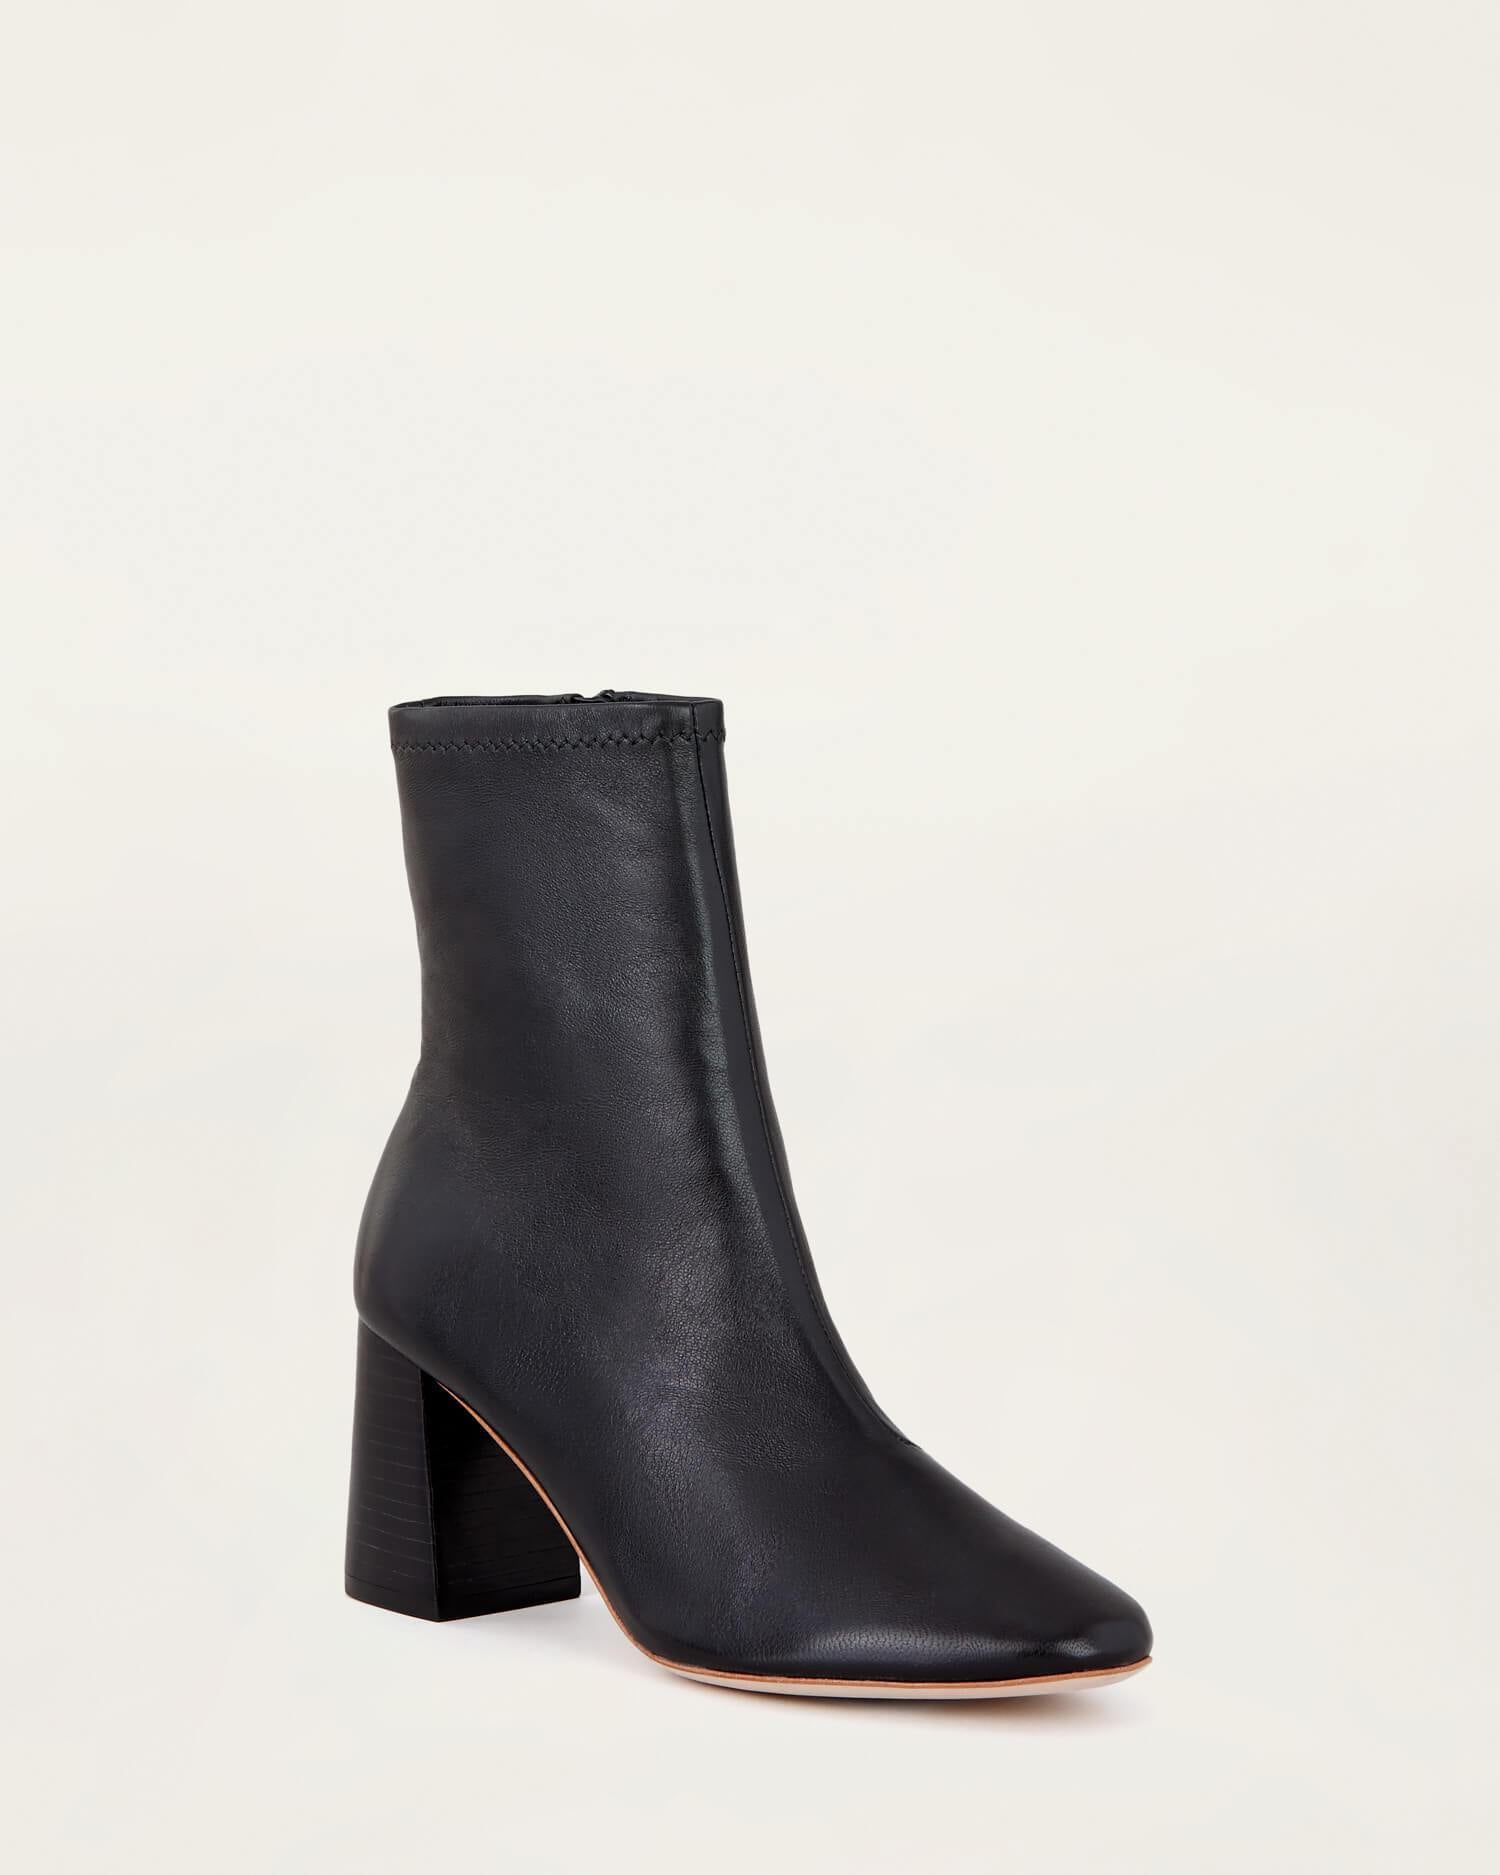 Ophelia Black Ankle Boot